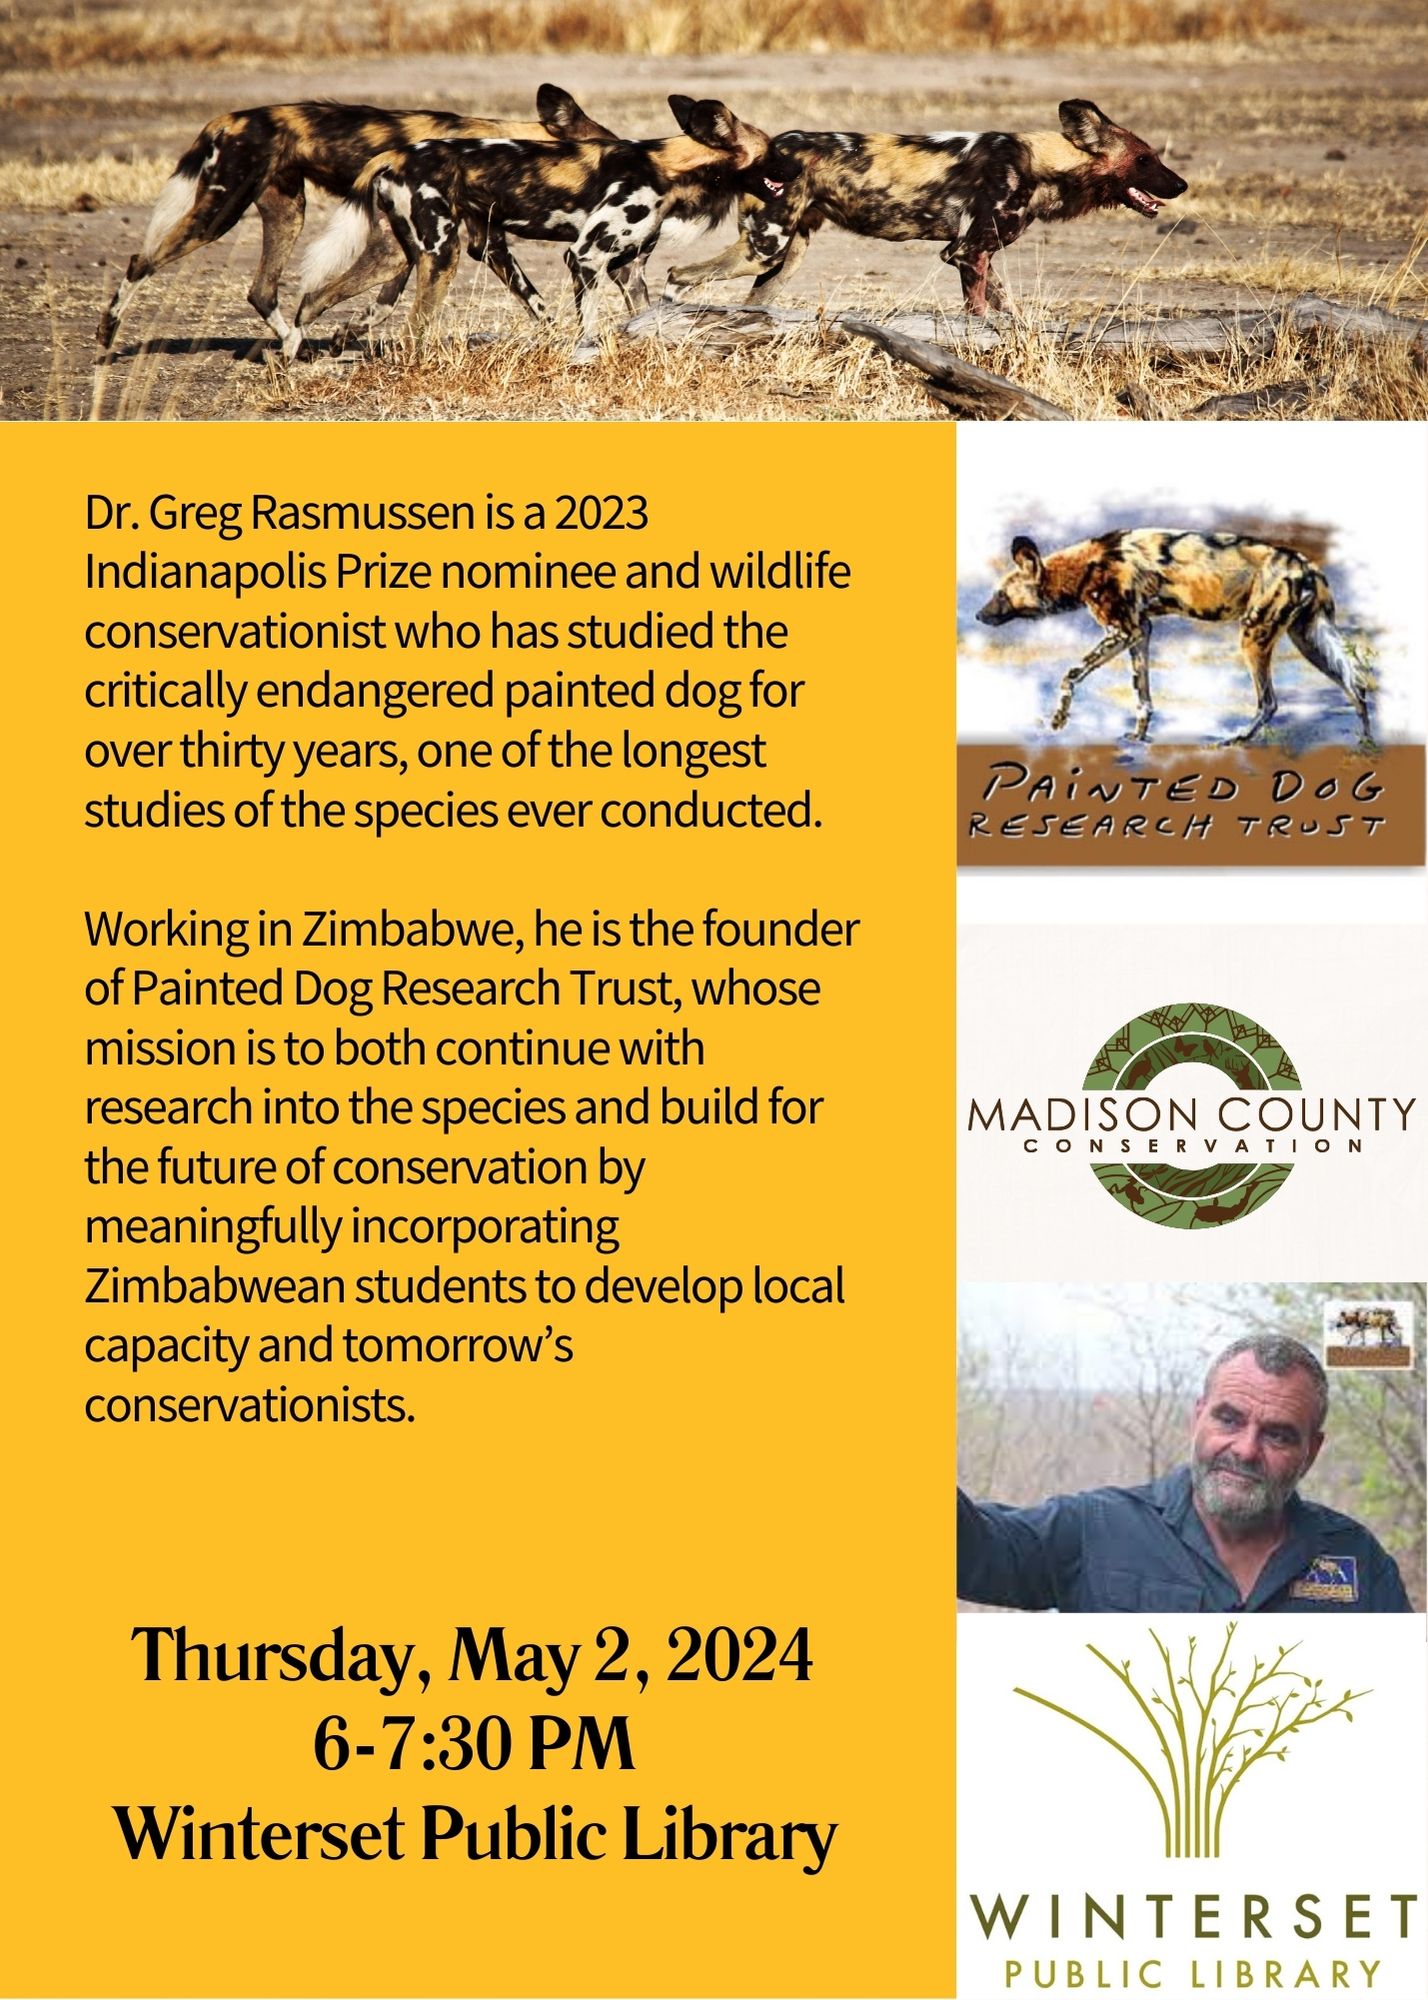 Event Flyer: Dr. Greg Rasmussen, founder for Painted Dog Research Trust
May 2, 2024 - Winterset Public Library